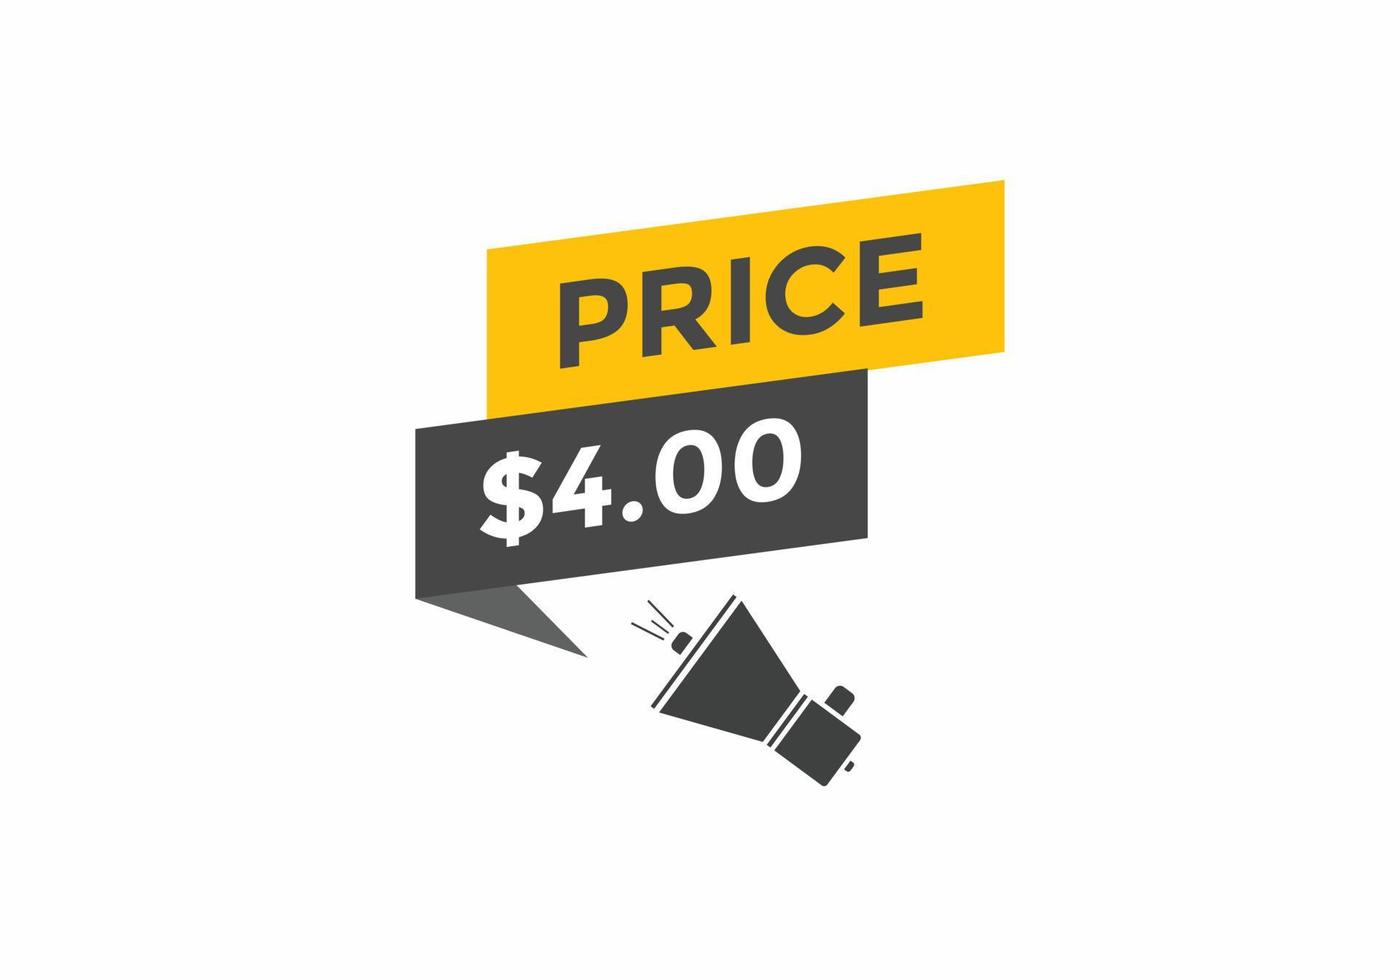 4 dollar price tag. Price 4 USD dollar only Sticker sale promotion Design. shop now button for Business or shopping promotion vector